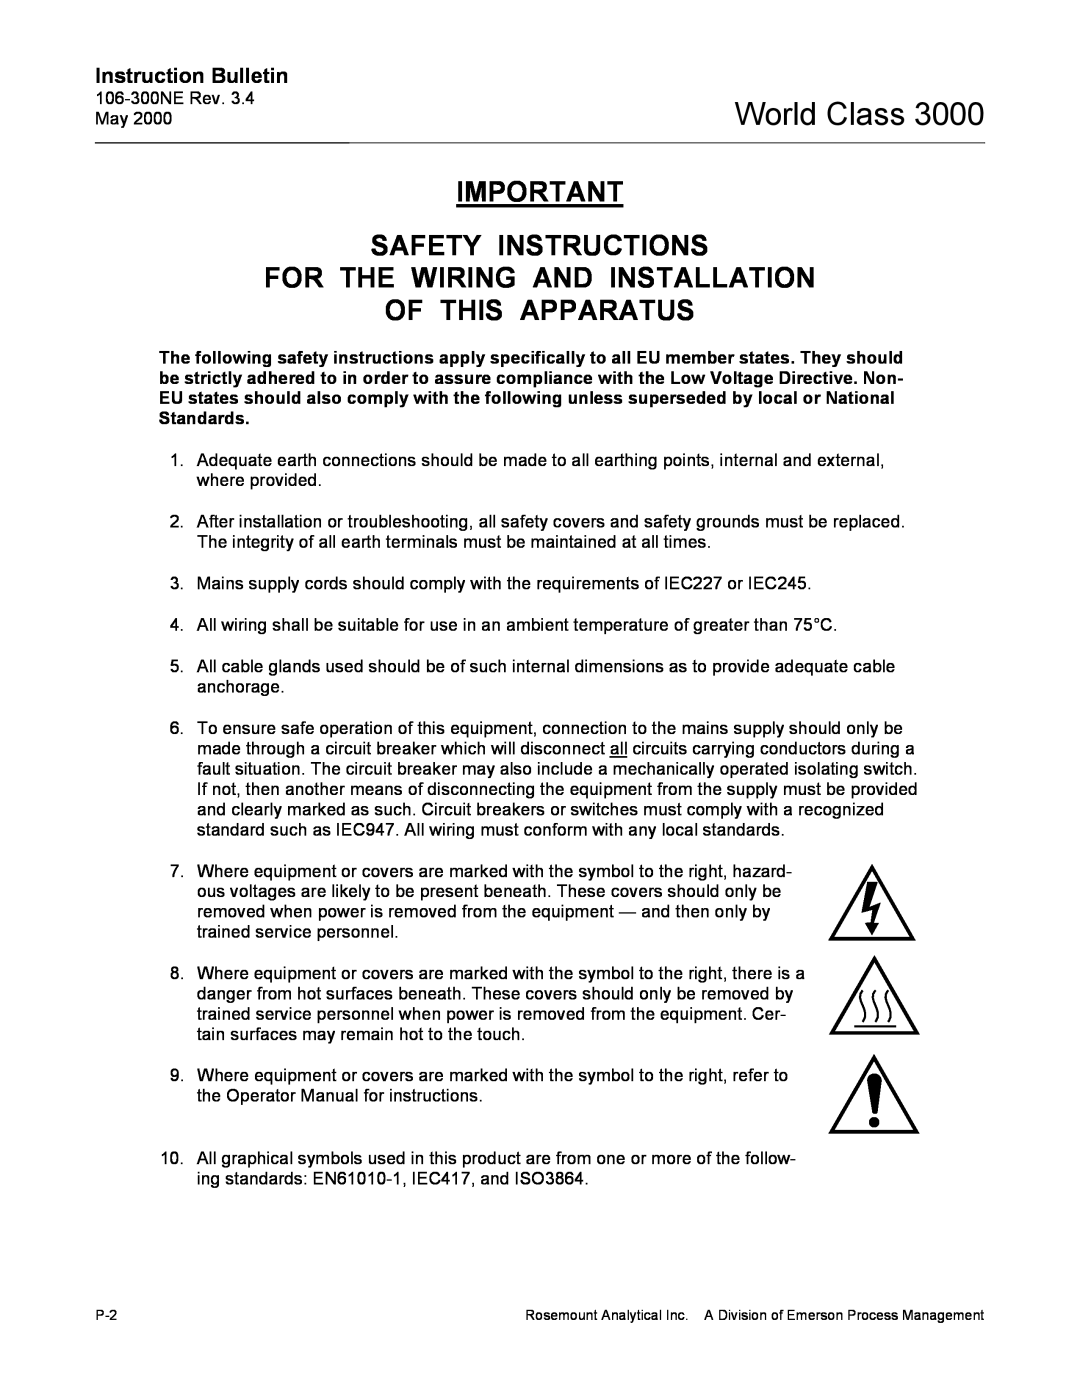 Emerson 3000 manual Safety Instructions, For The Wiring And Installation Of This Apparatus, Instruction Bulletin 